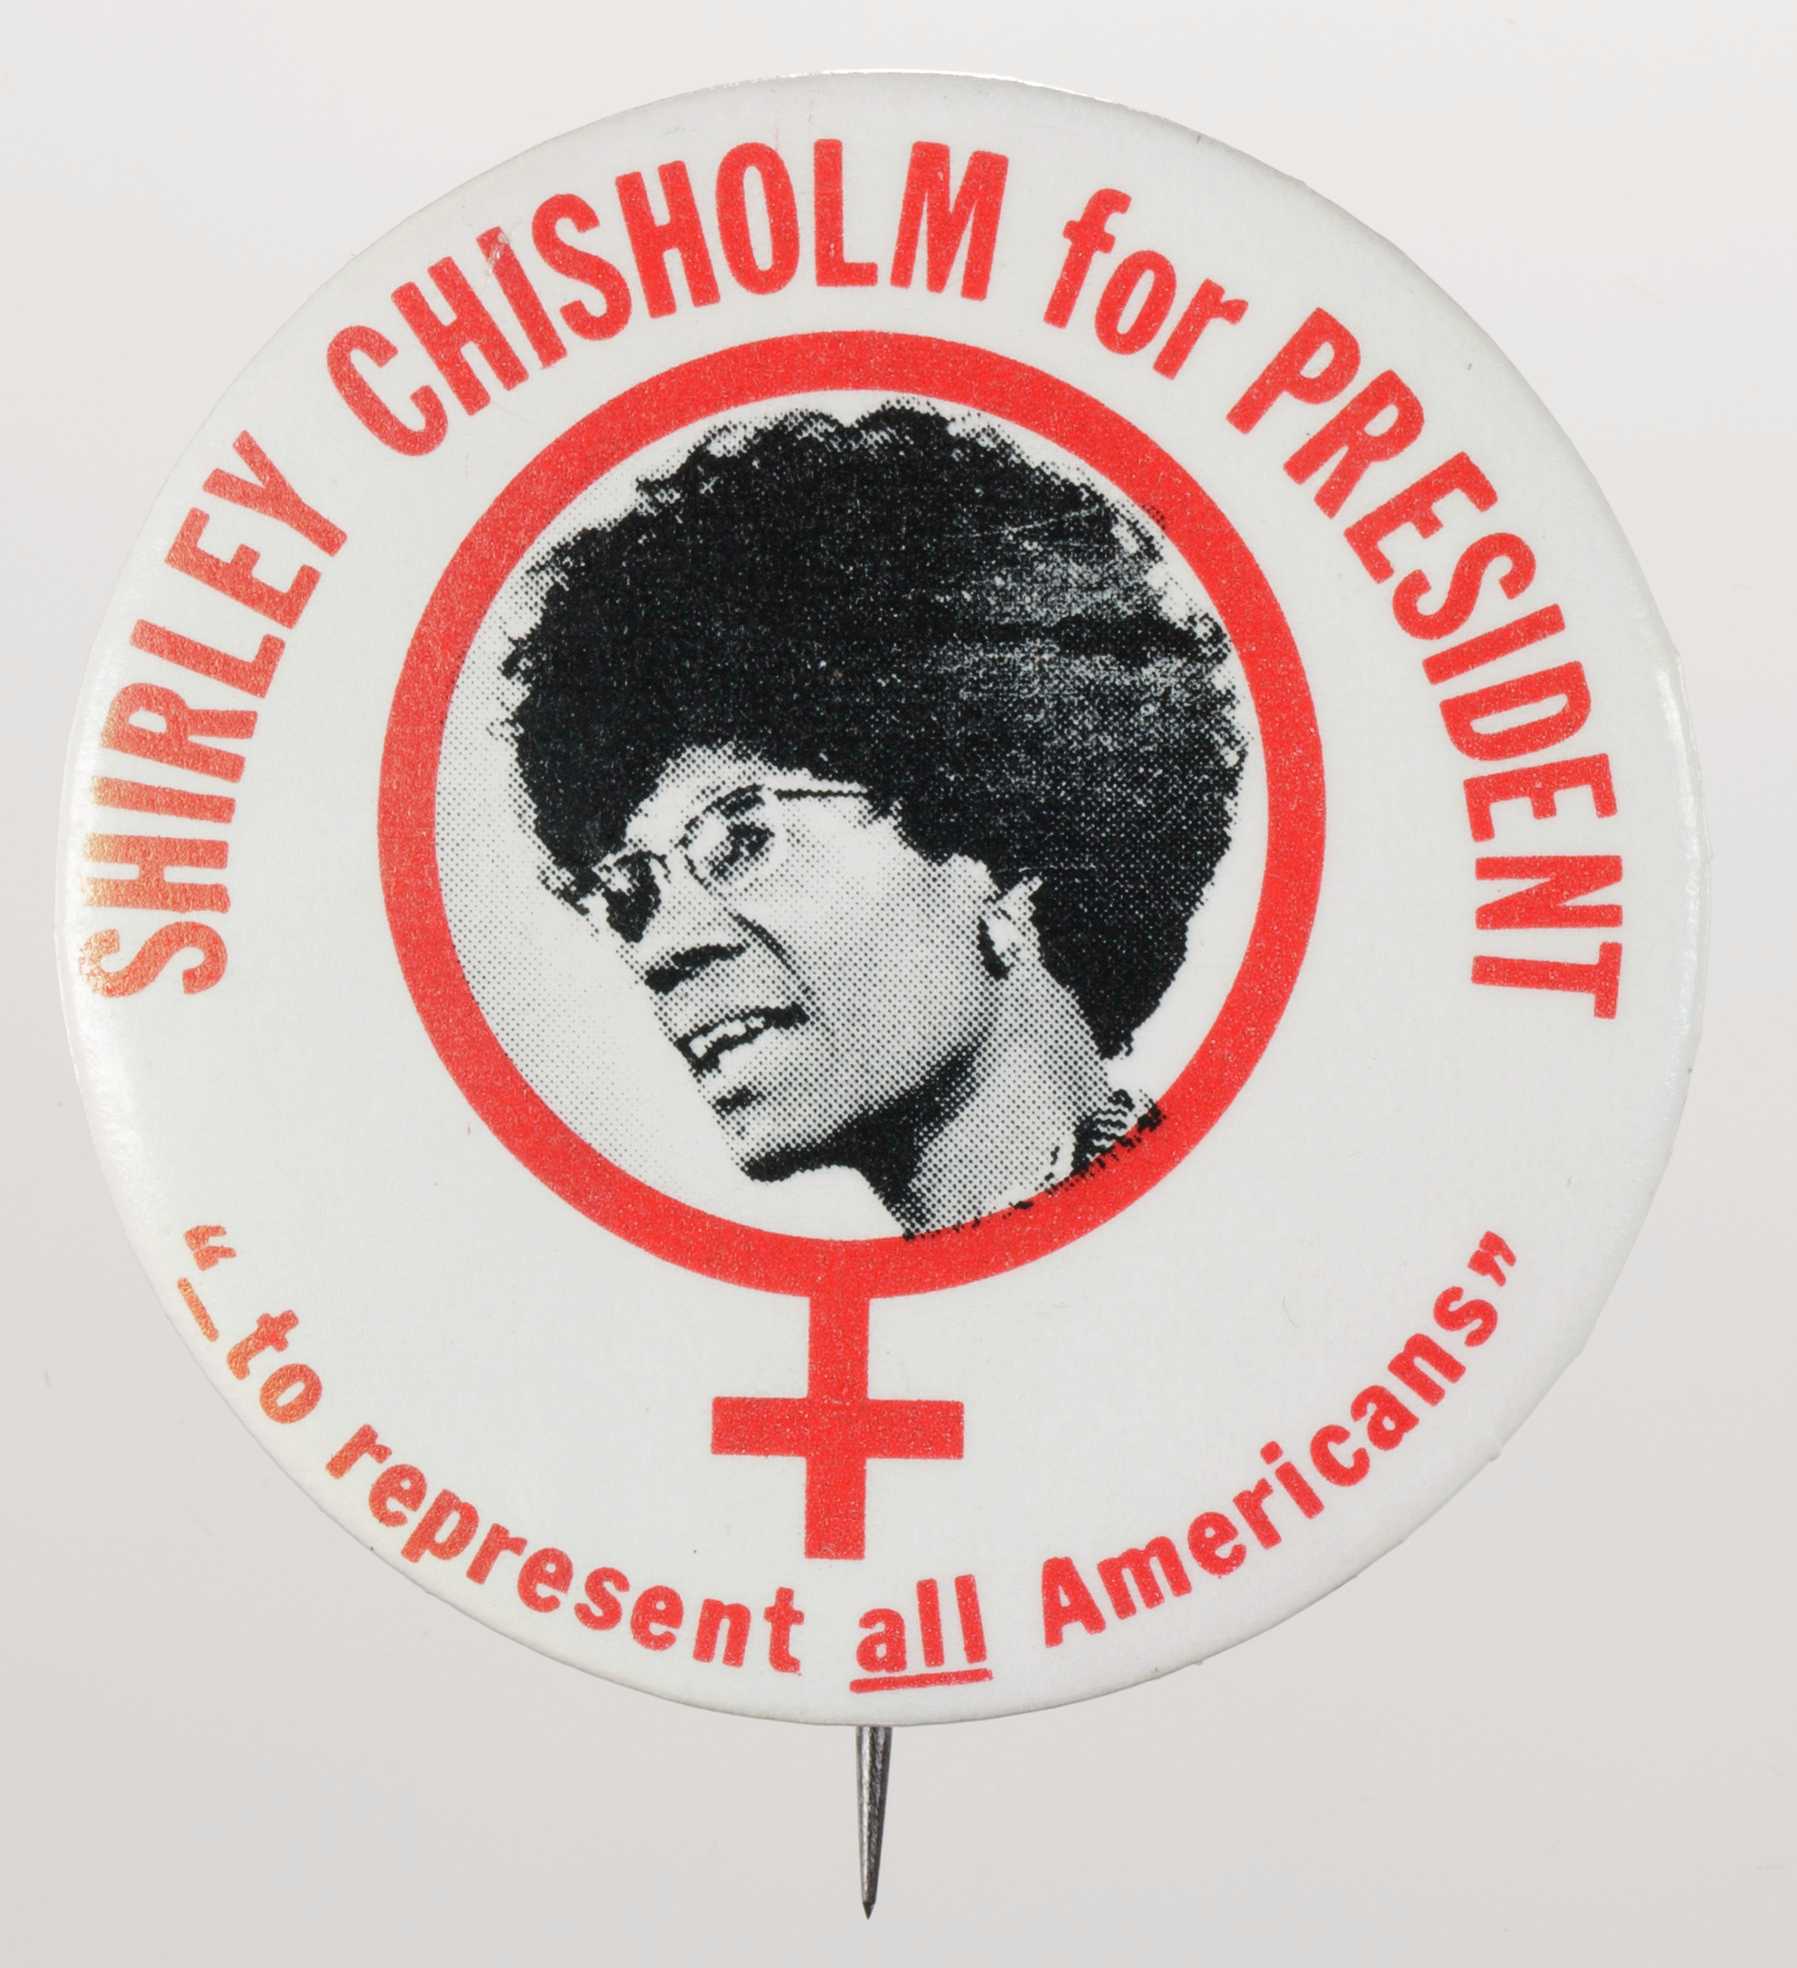 A circular metal pin-back button. The button has a white background with red type that reads: [SHIRLEY CHISHOLM for PRESIDENT] around the top and ["_to represent all Americans"] around the bottom. The center of the button has a black-and-white depiction of Shirley Chisholm inside a red female symbol. Black text around the edge of the button reads:  [(c) 1972 A. G. TRIMBLE E CO. PGH, PA.15222)]. The edge also has a diamond logo that reads [AFL-CIO IUDTW]. The back of the button is silver in color, and has a single pin without a clasp.